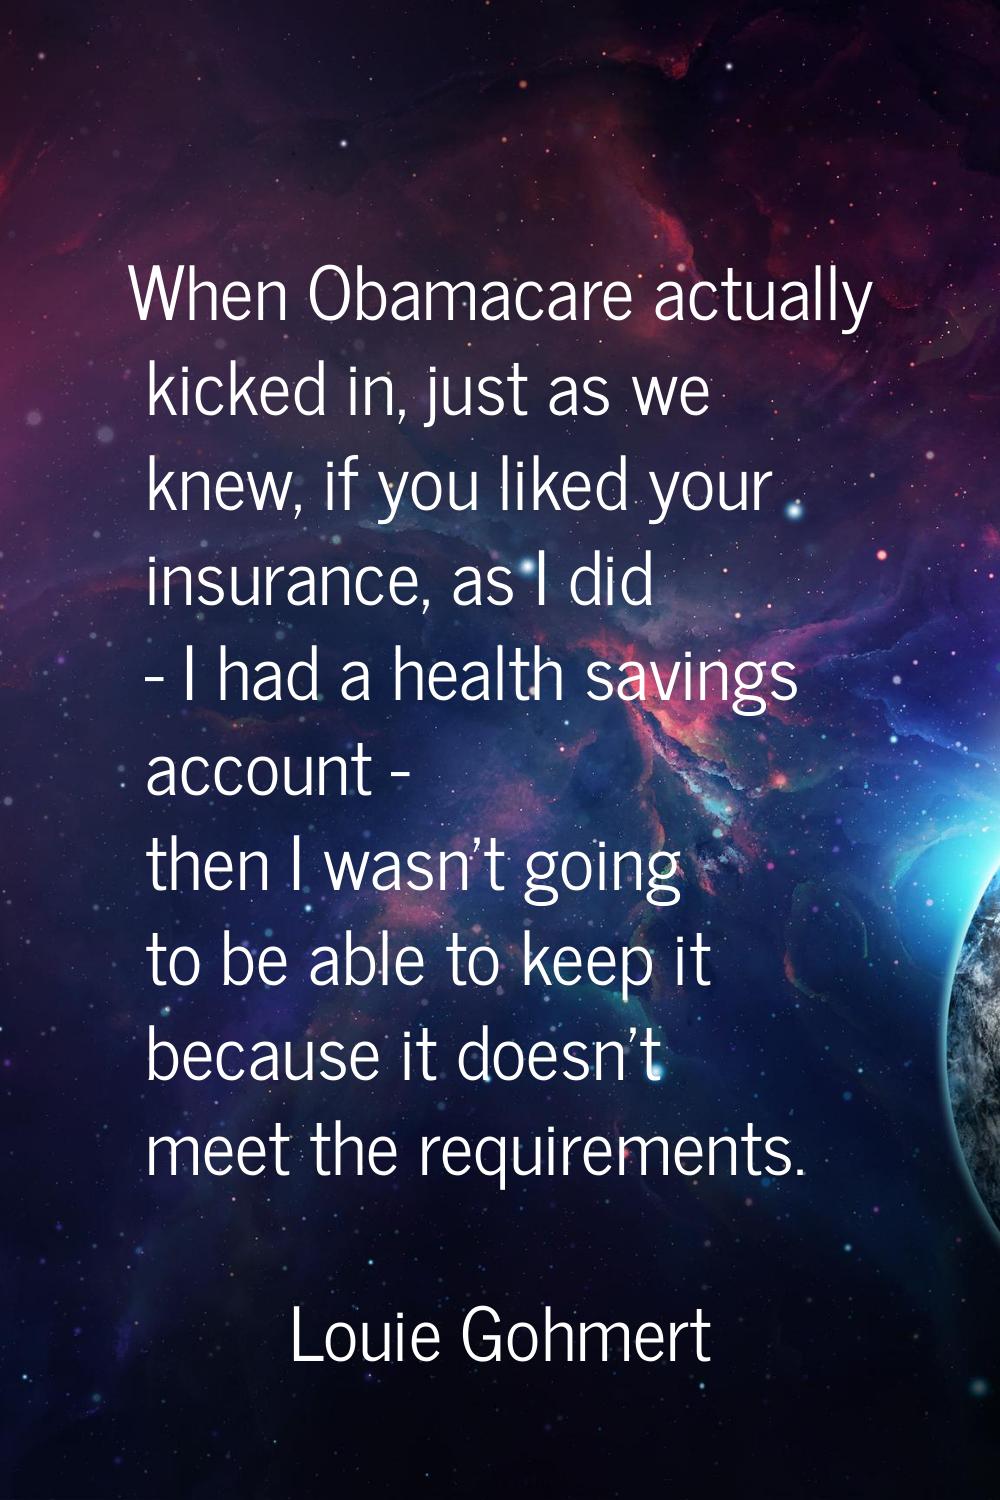 When Obamacare actually kicked in, just as we knew, if you liked your insurance, as I did - I had a